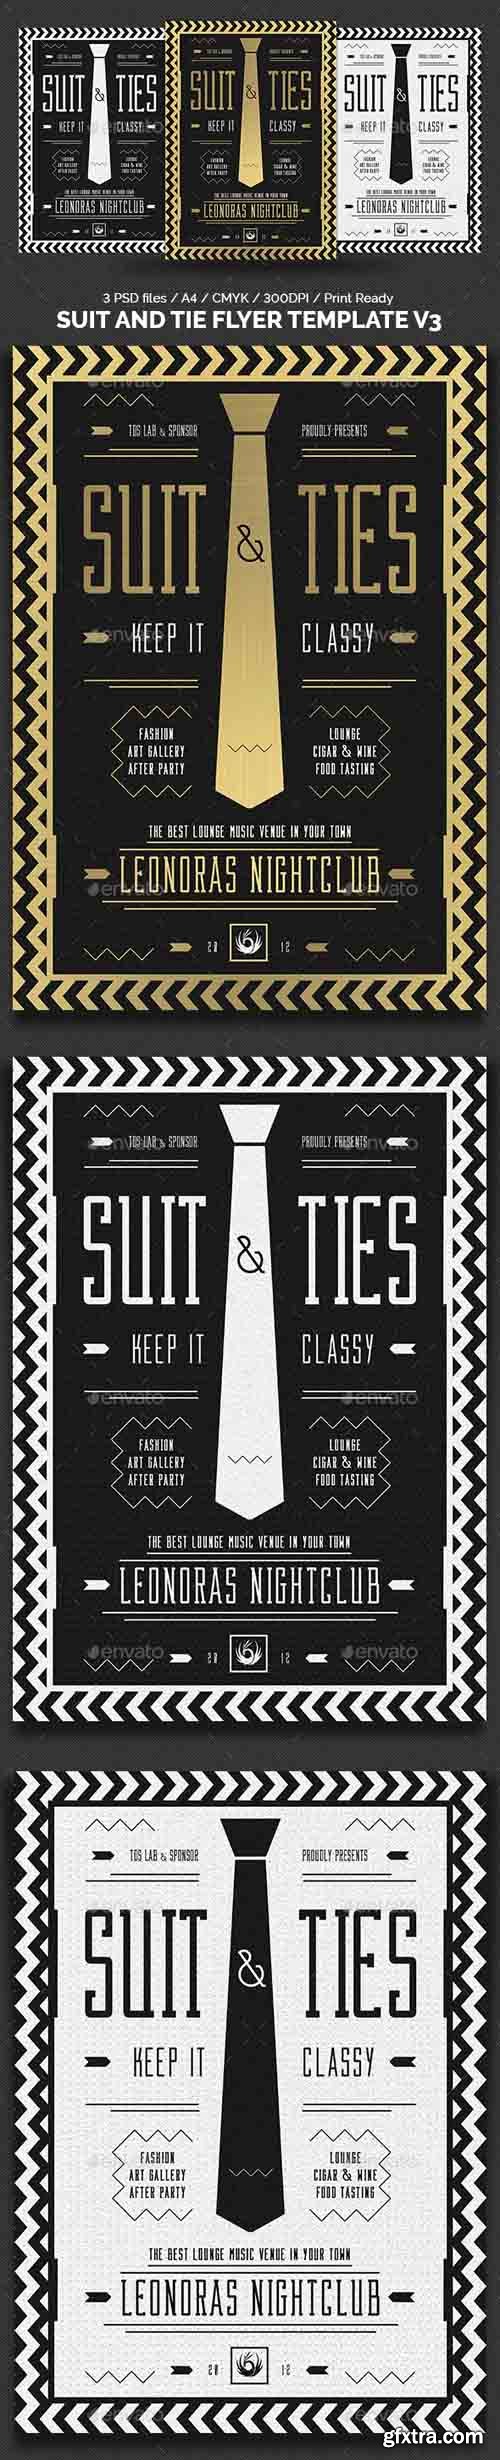 GraphicRiver - Suit and Tie Flyer Template V3 19364356